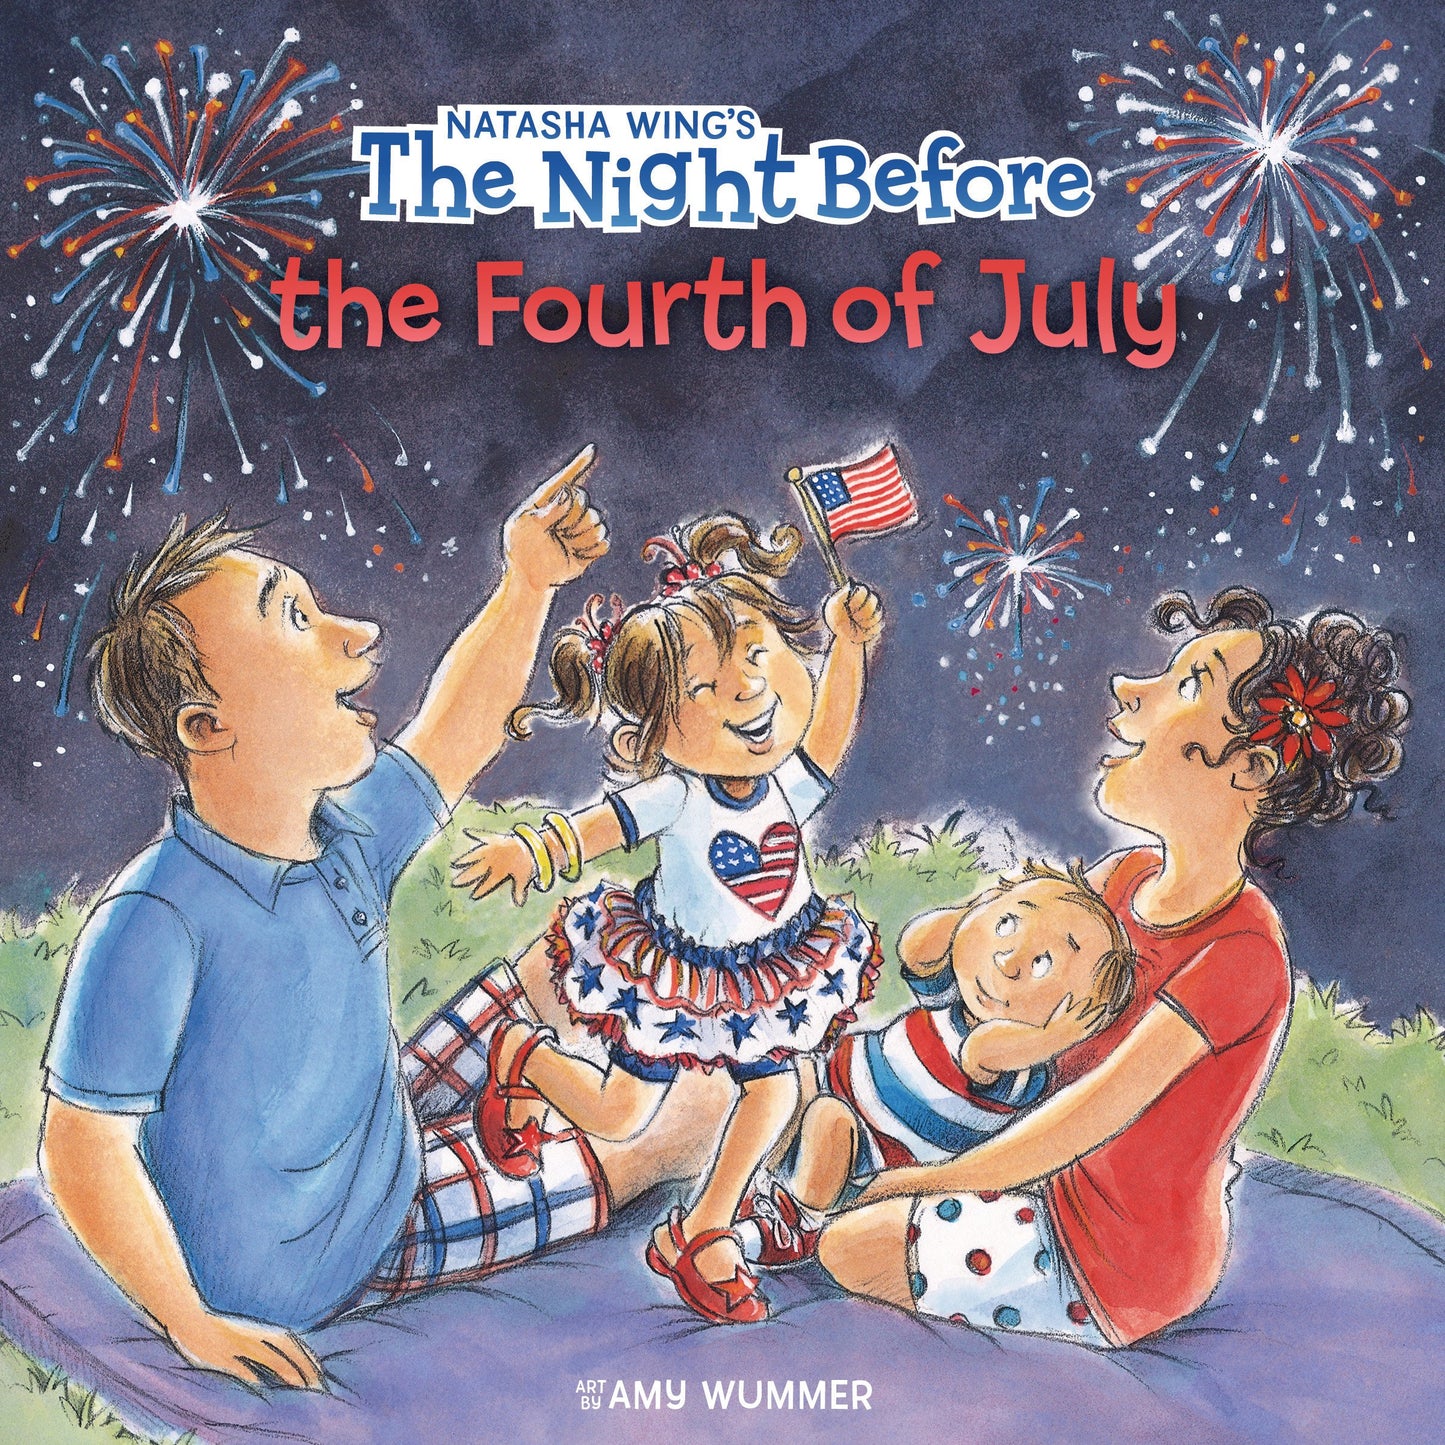 The Night Before the Fourth of July (Night Before)